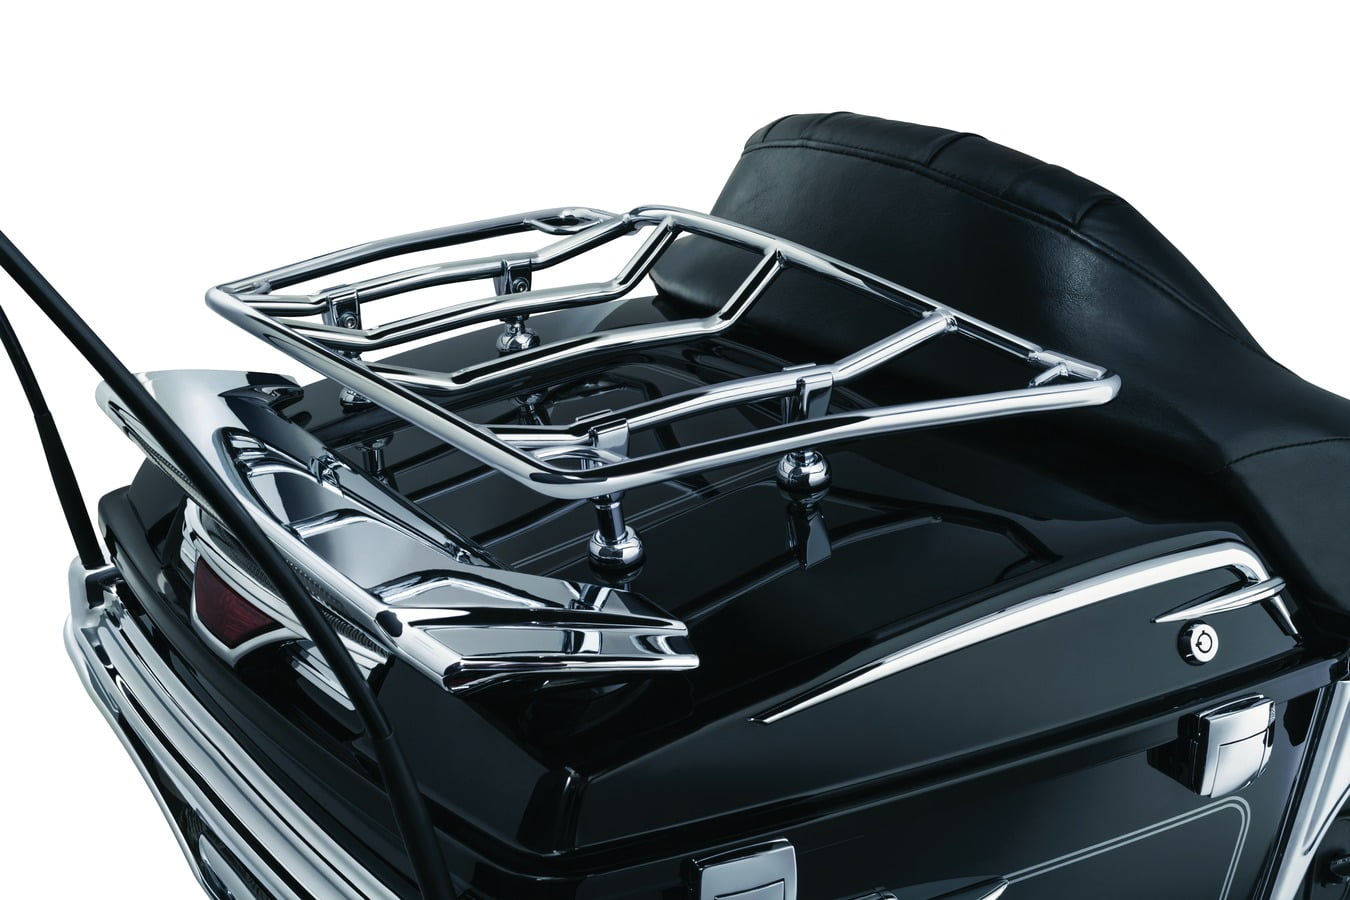 Chrome Motorcycles Trunk Luggage Storage Rack with Corner Tie Down Points fit for Harley 1980-2019 Color : Black 